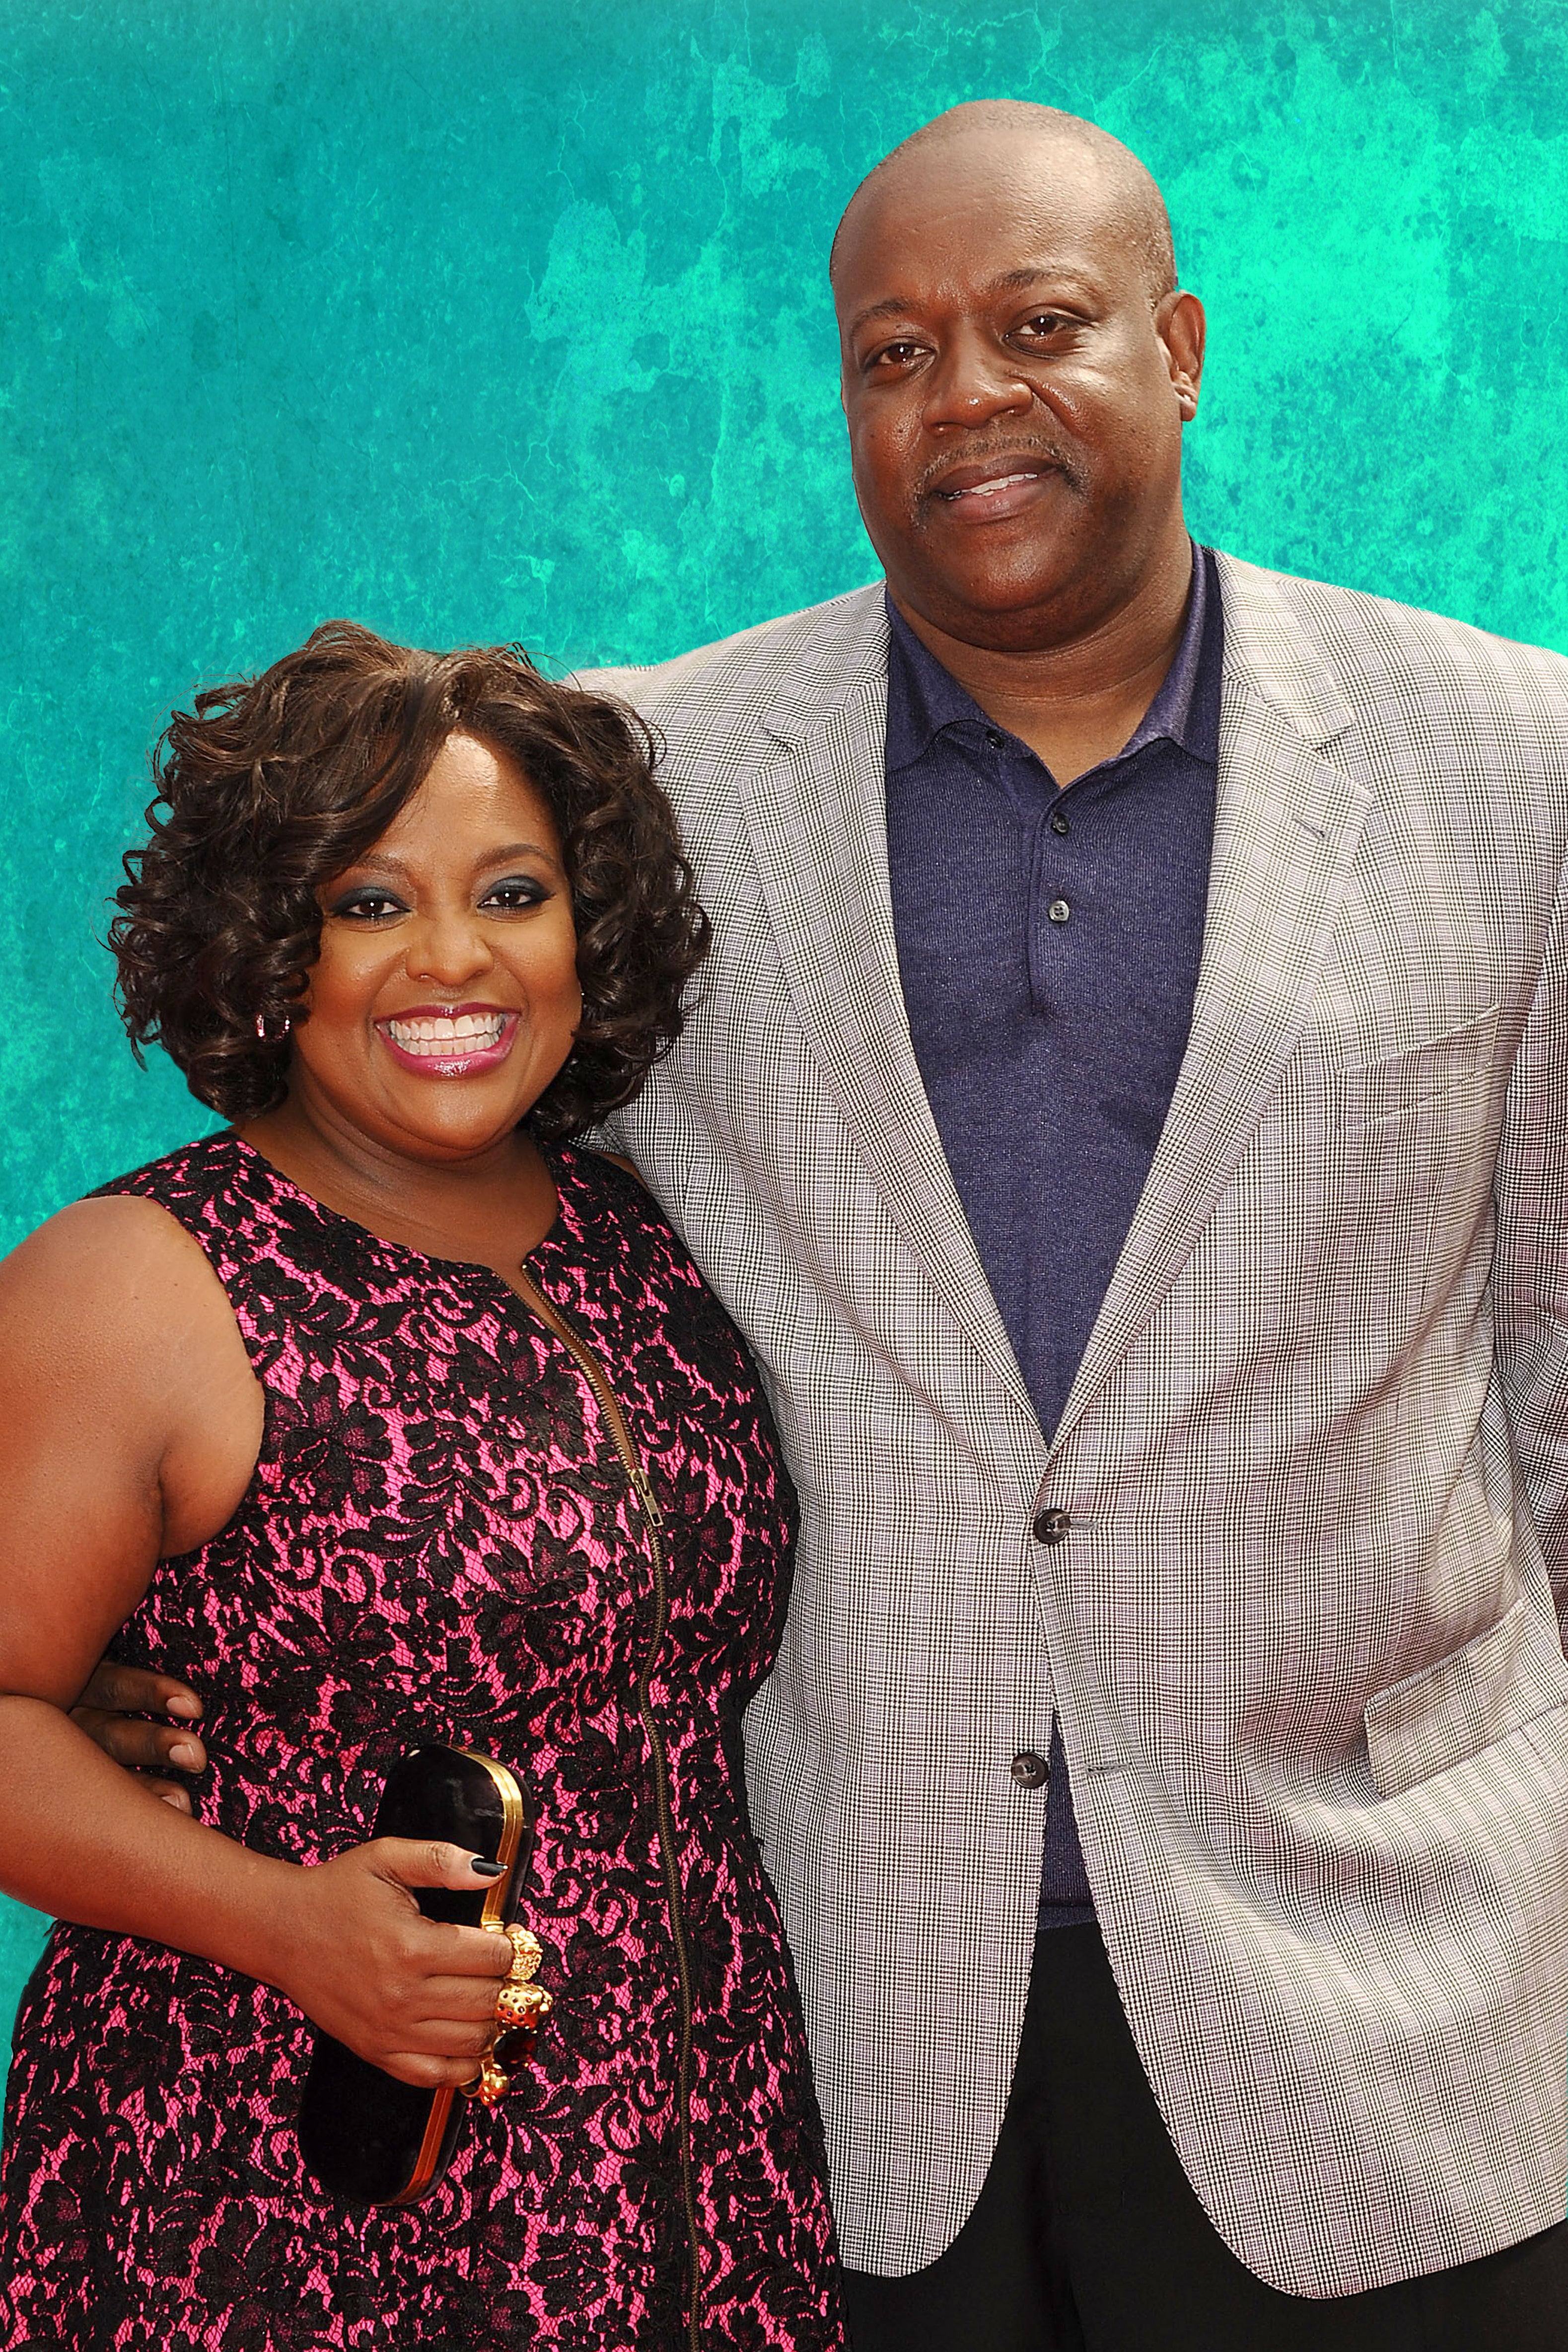 Sherri Shepherd Spots Ex-Husband Claiming to Be 'Well-Off' In Dating Profile And Claps Back Perfectly
